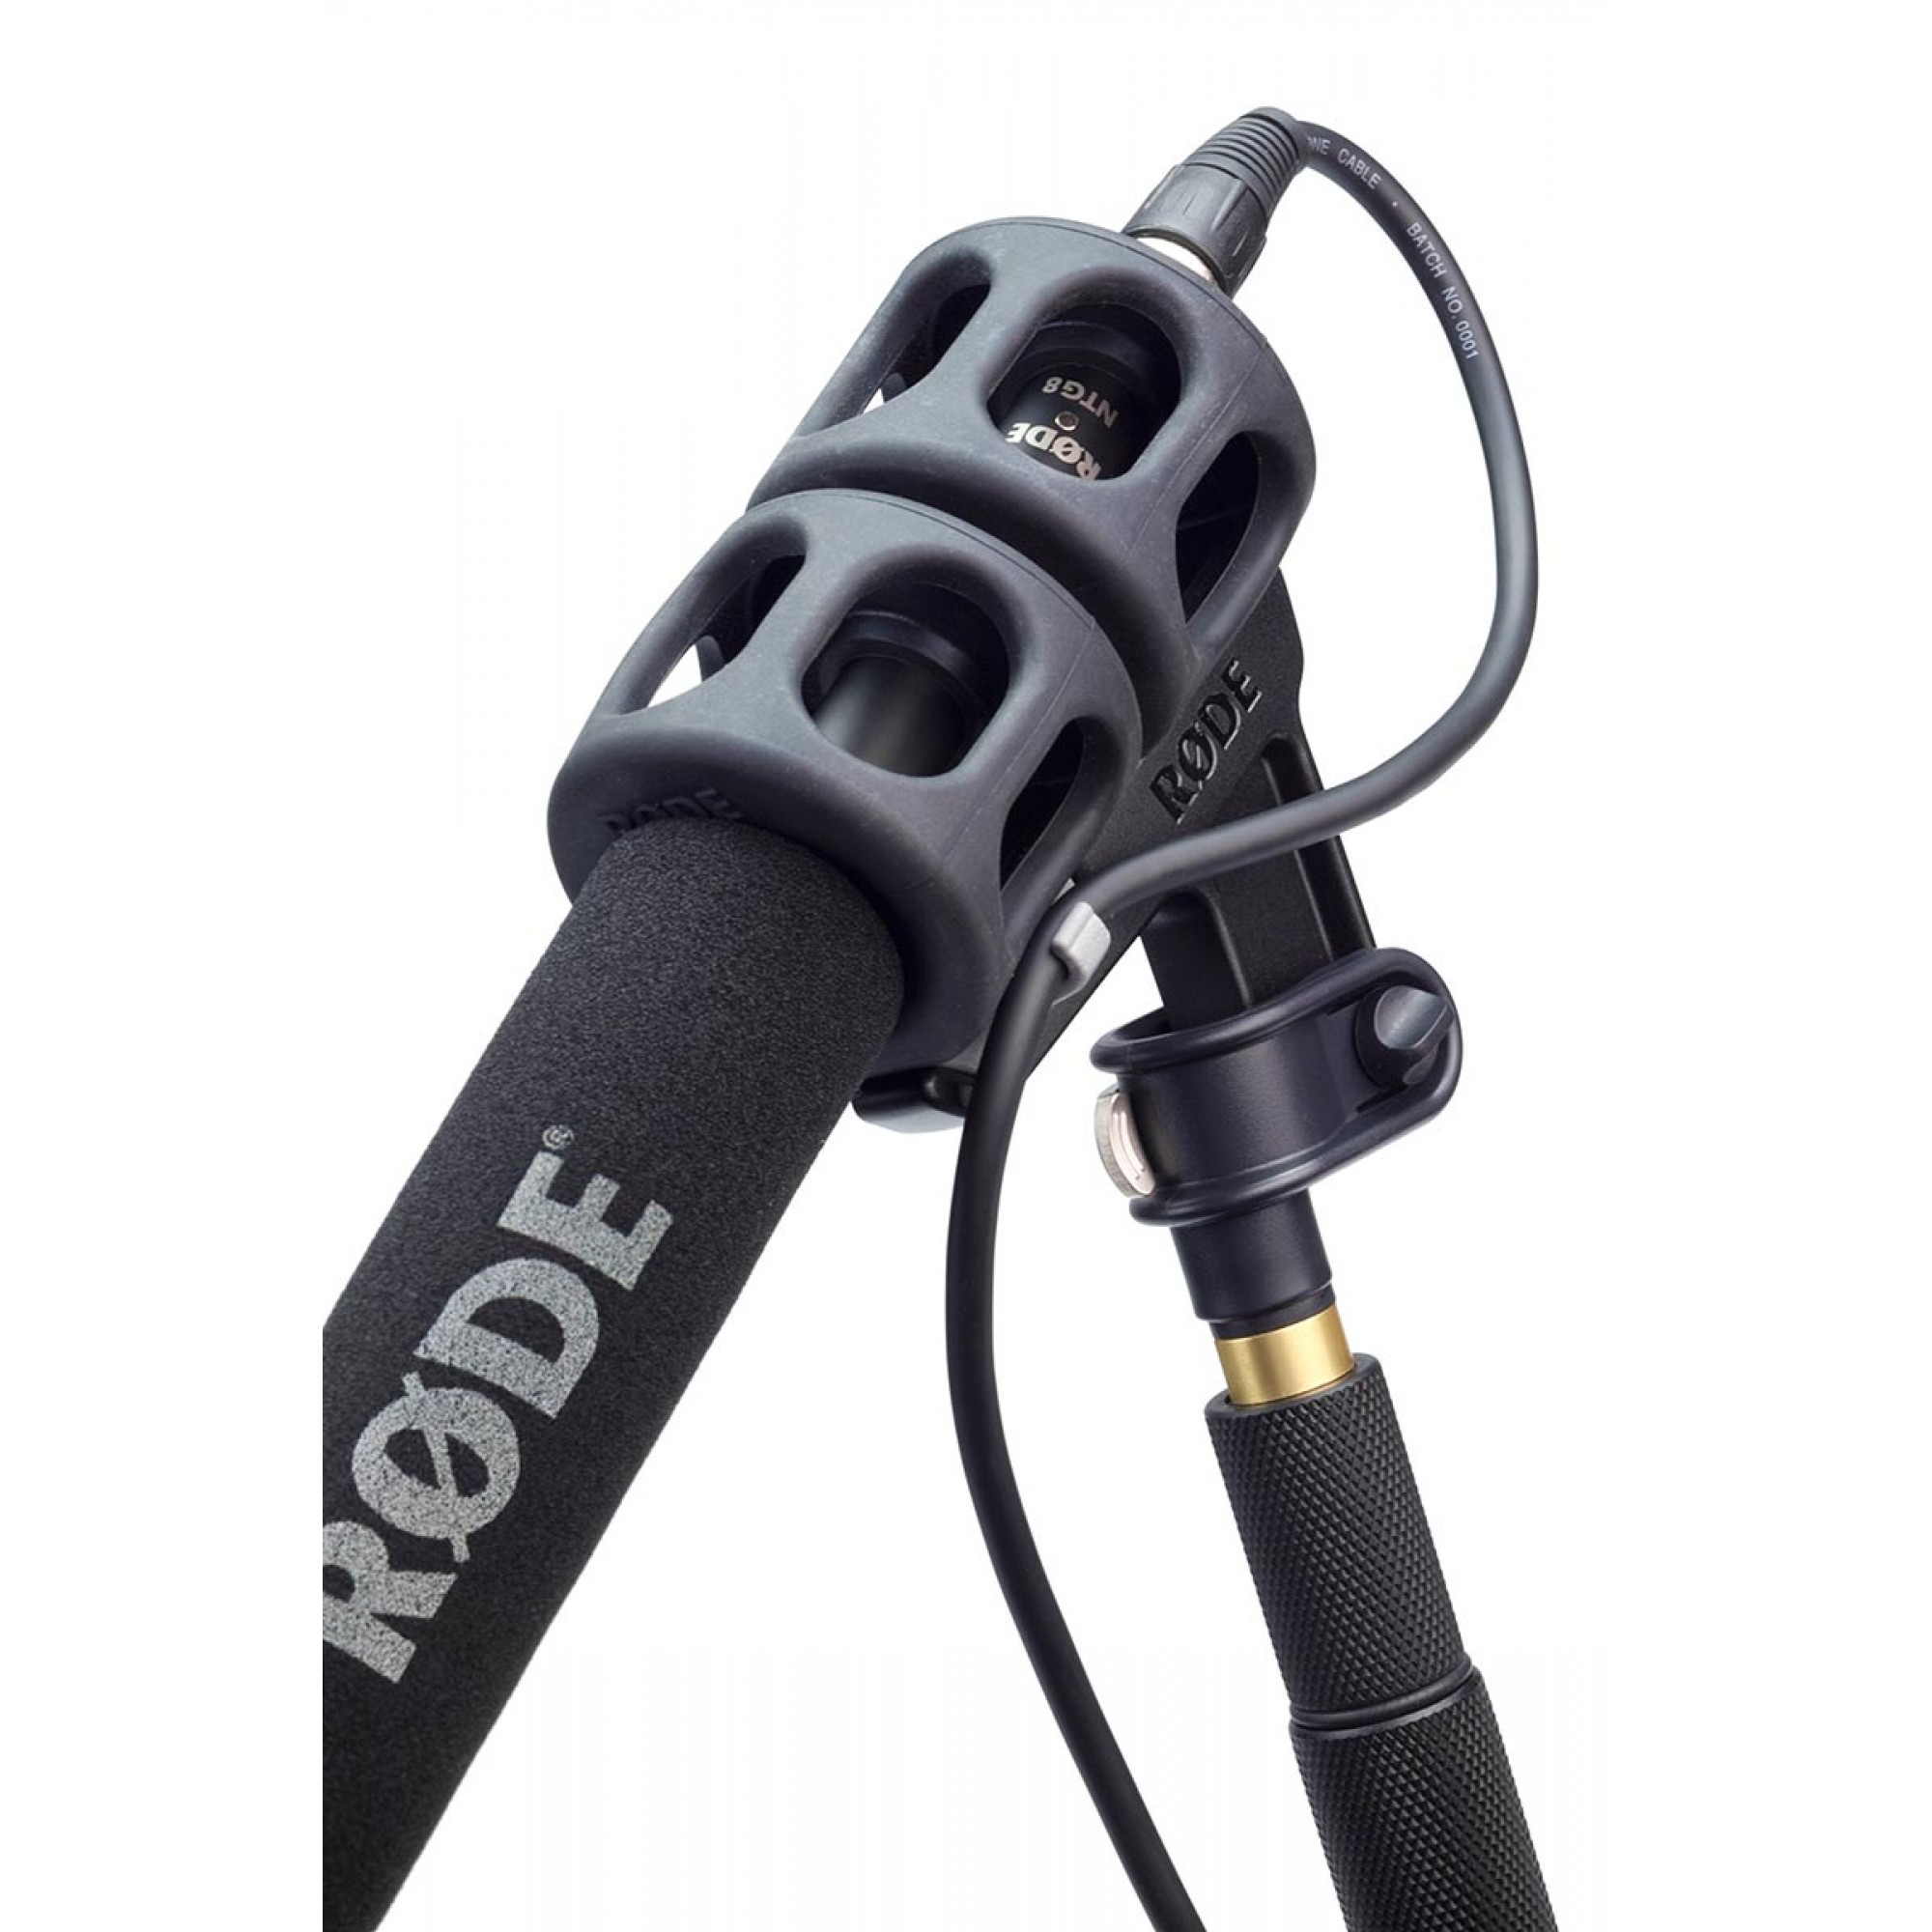 Rode microphone driver for windows 7